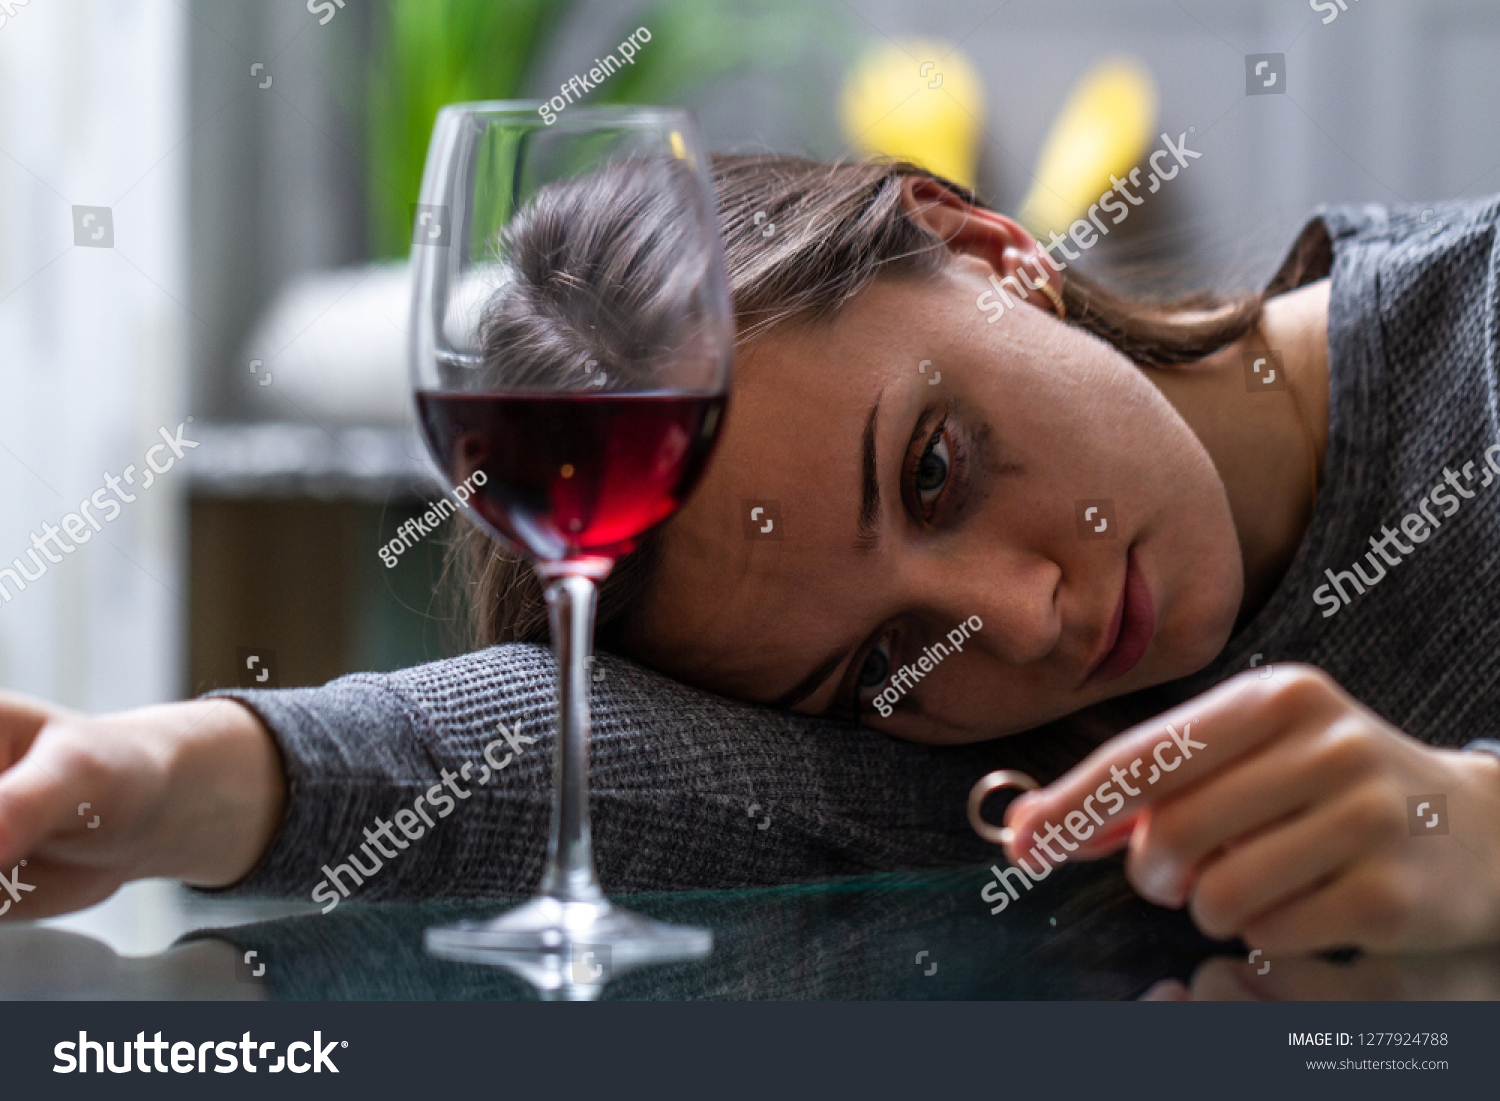 Crying, divorced woman holding a wedding ring and drinking alone red wine because of adultery, the betrayal of her husband and a failed marriage. Divorce concept. #1277924788